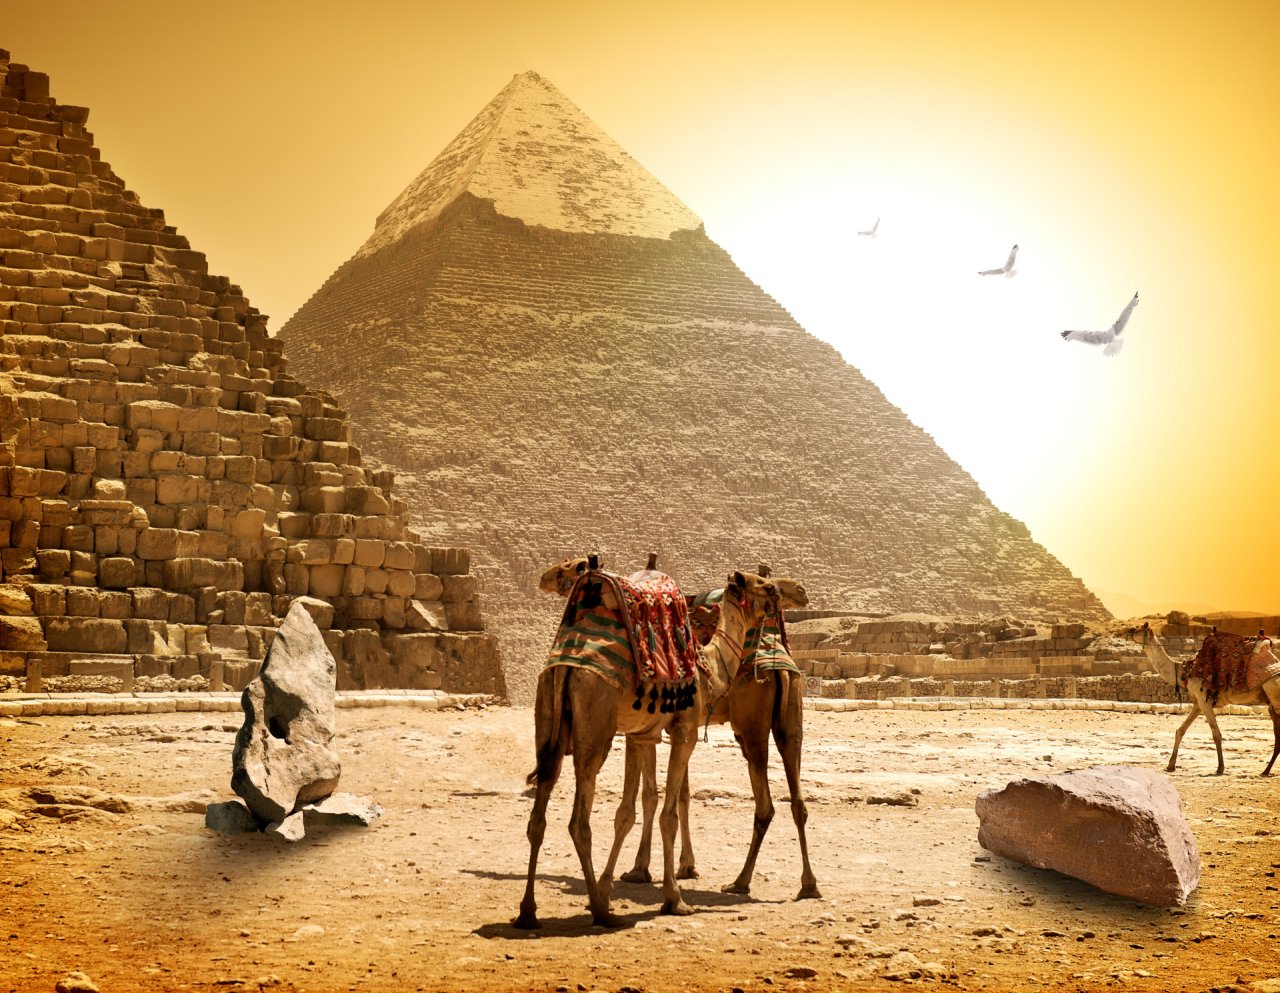 Camels and pyramids at the hot sunny evening